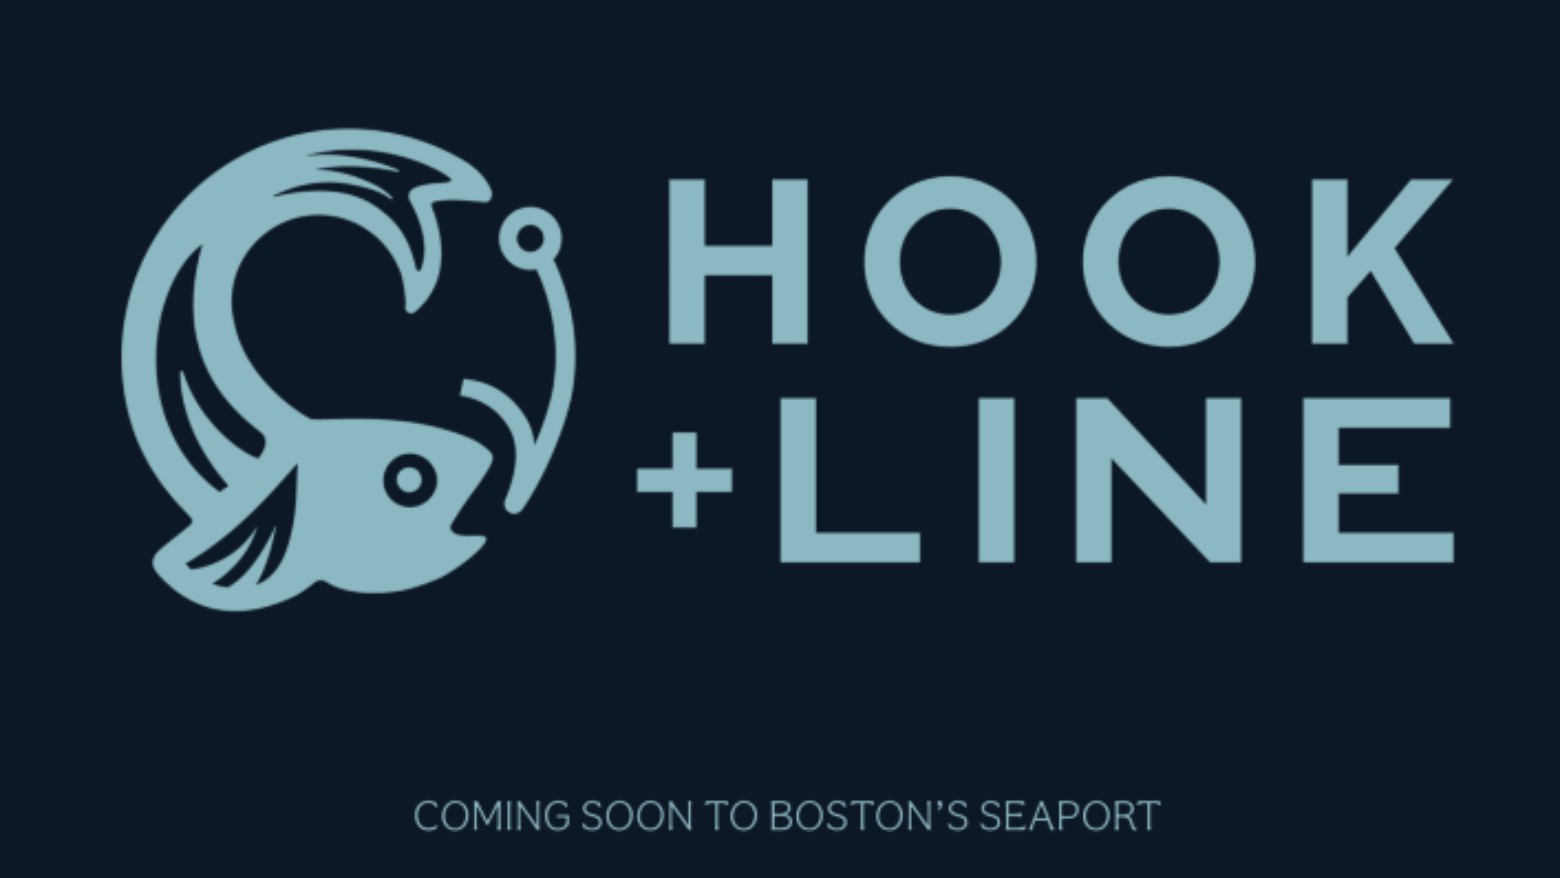 Hook + Line Coming This Fall - Boston Restaurant News and Events